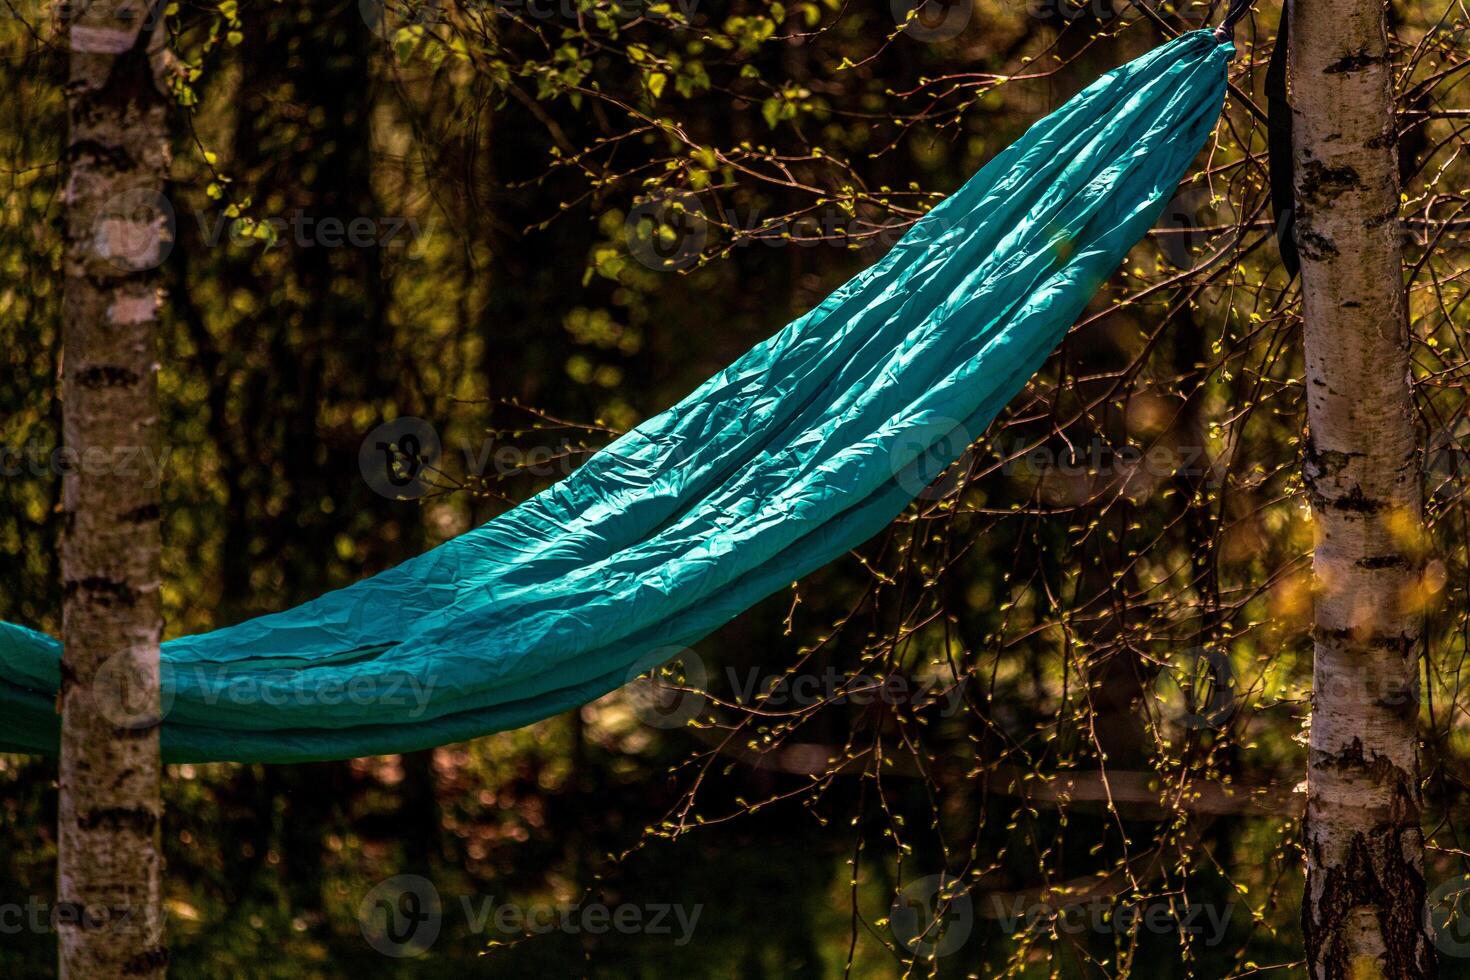 The hammock is stretched between the birch trees. Summer vacation photo